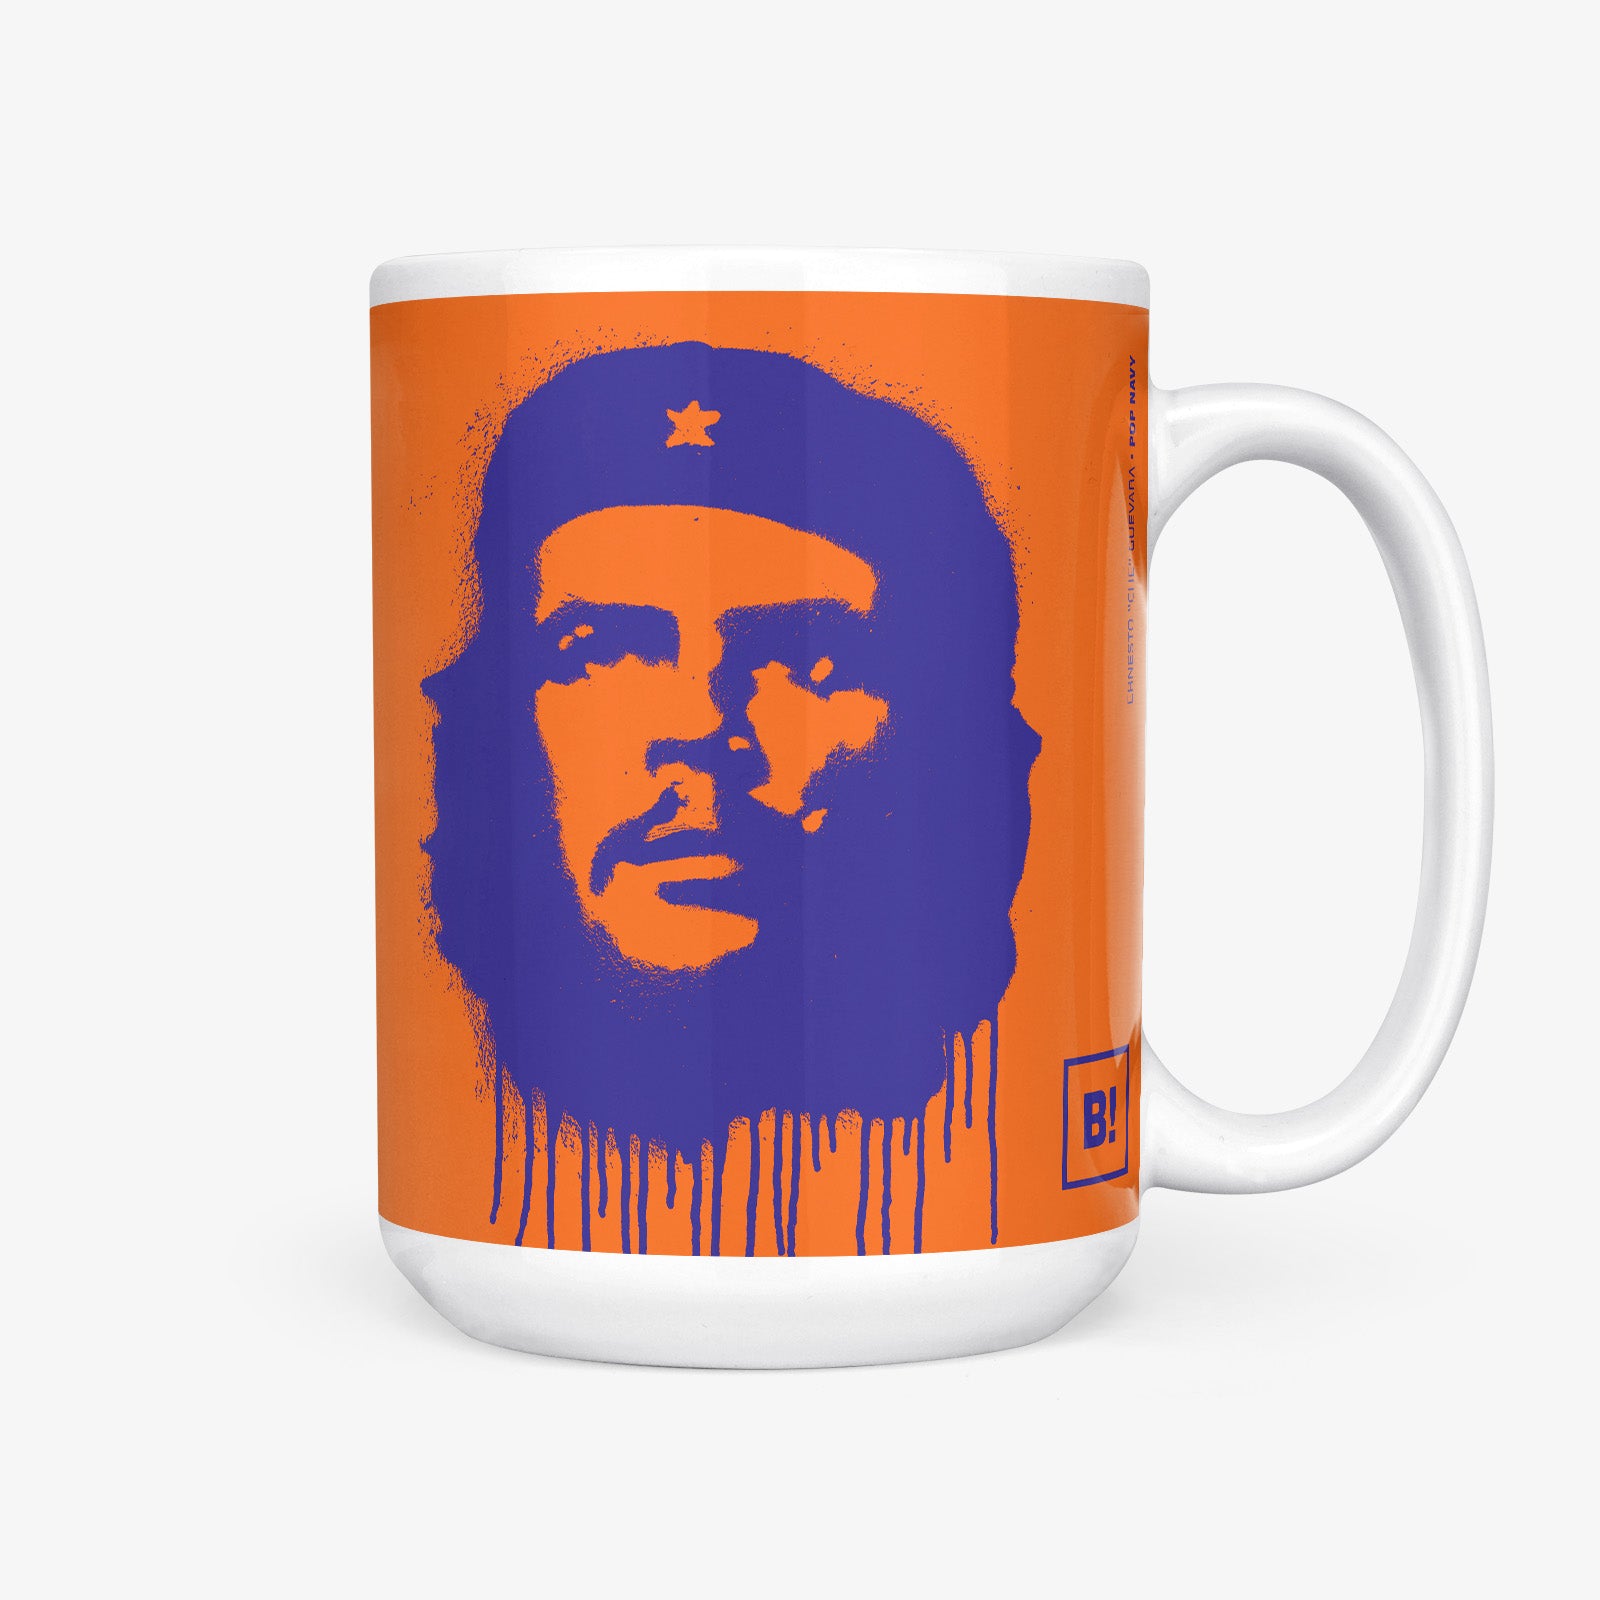 Be inspired by our "Ernesto Che Guevara" Pop Navy Coffee Mug. Featuring a 15oz size with the handle on the right.